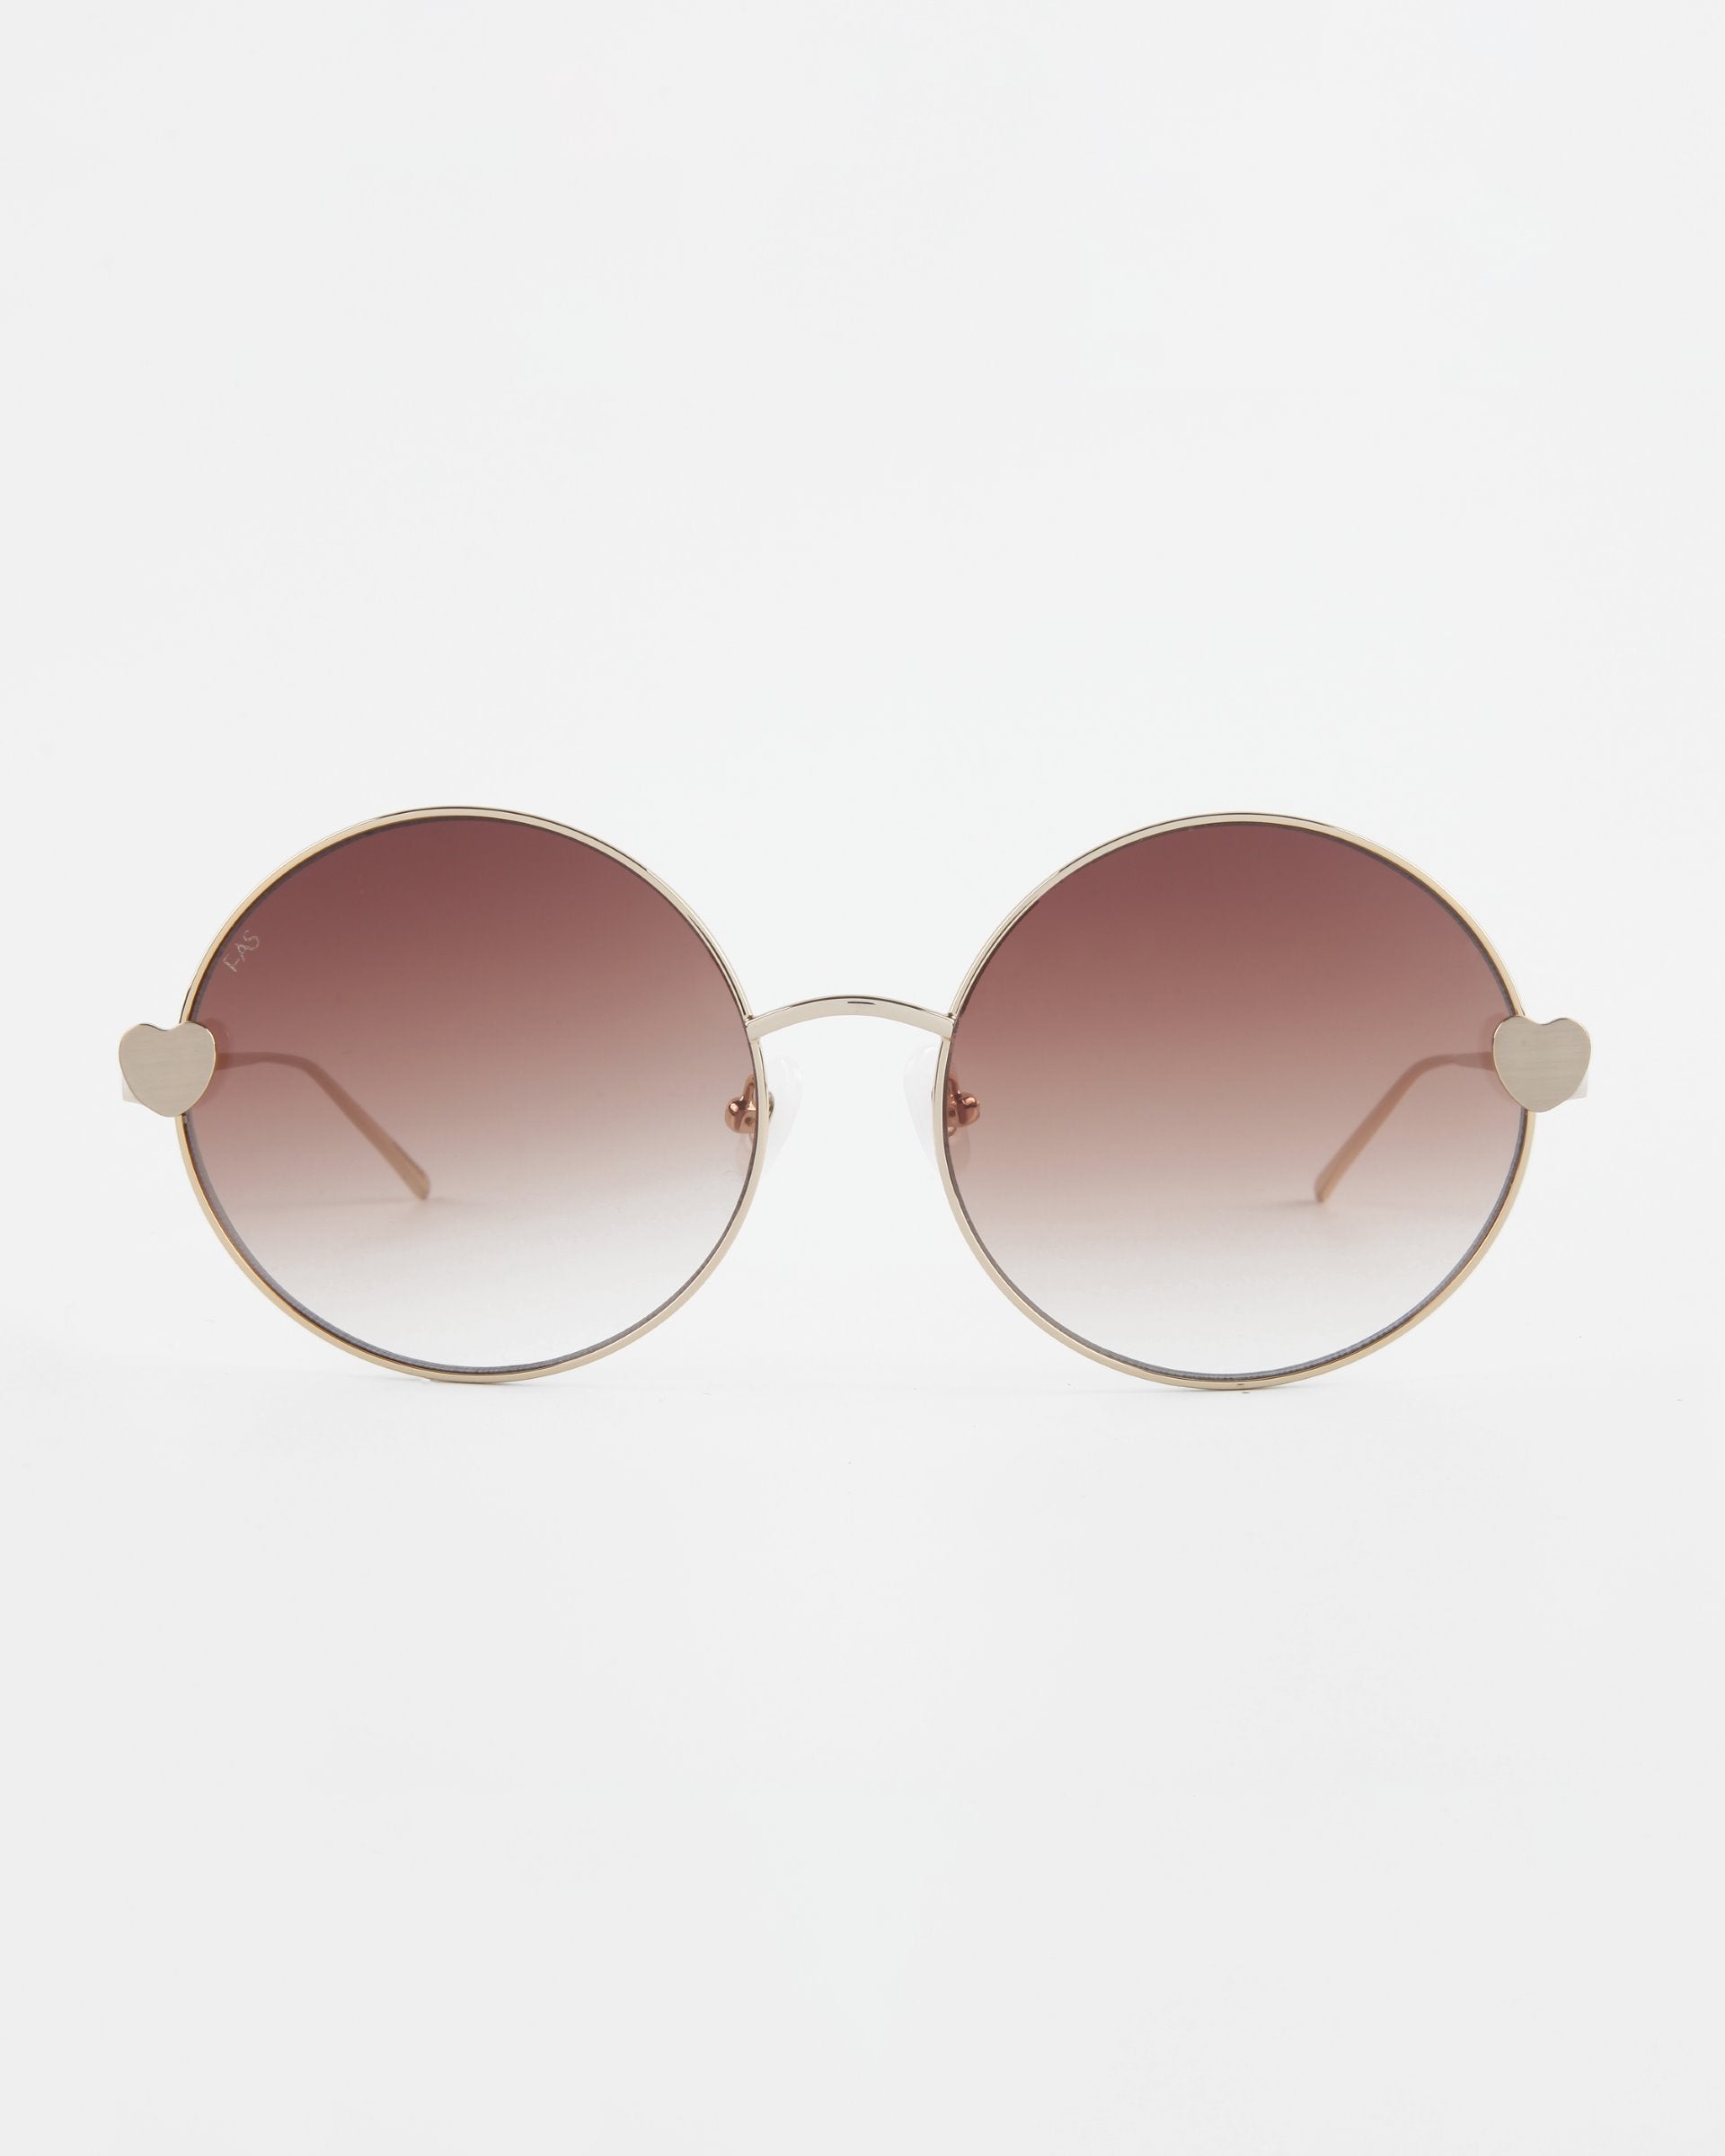 A pair of round For Art's Sake® Love Story shades with a thin gold frame and gradient brown lenses. These sunglasses feature small heart-shaped details at the hinges where the frames meet the lenses, jadestone nose pads for added comfort, and 100% UV protection. The background is plain white.